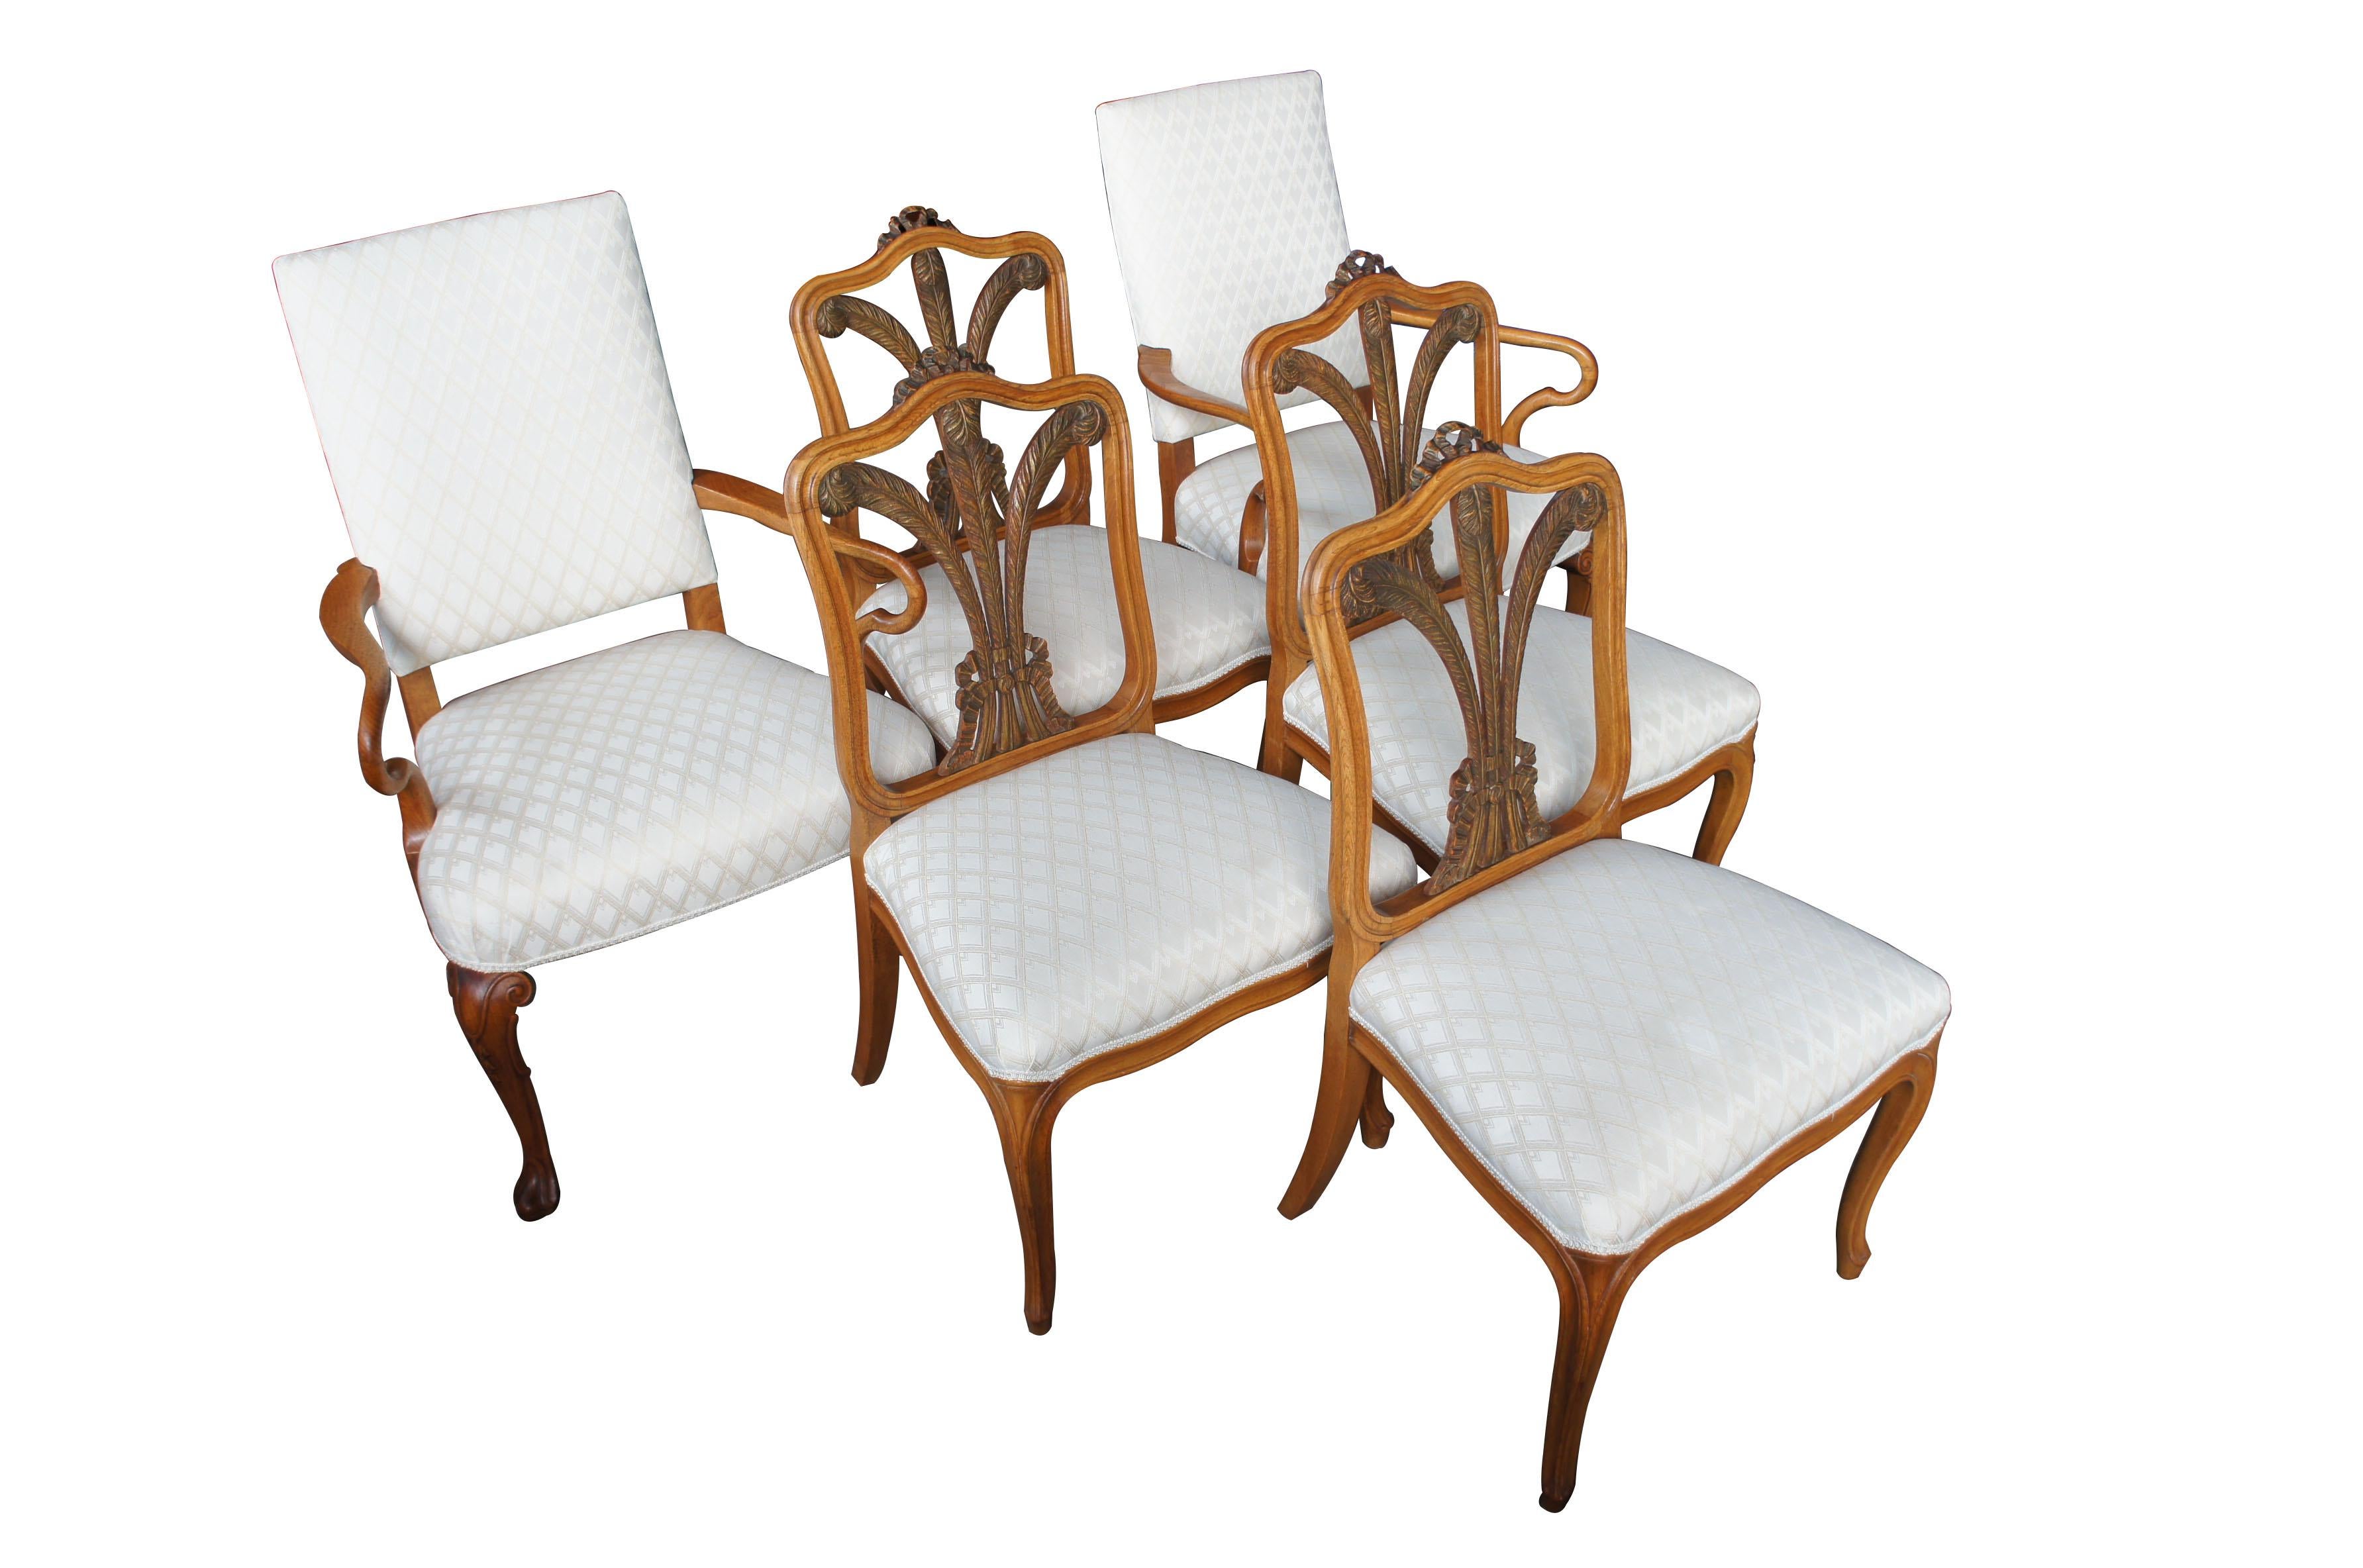 6 Robert Irwin Furniture Co. dining chairs Louis XVI Style Florentine Rococo

(1919-1953)
Irwin, Robert W. Co 
Grand Rapids, Mi

An exquisite French walnut chair set Robert Irwin Furniture Company. Elegantly designed with an open florentine